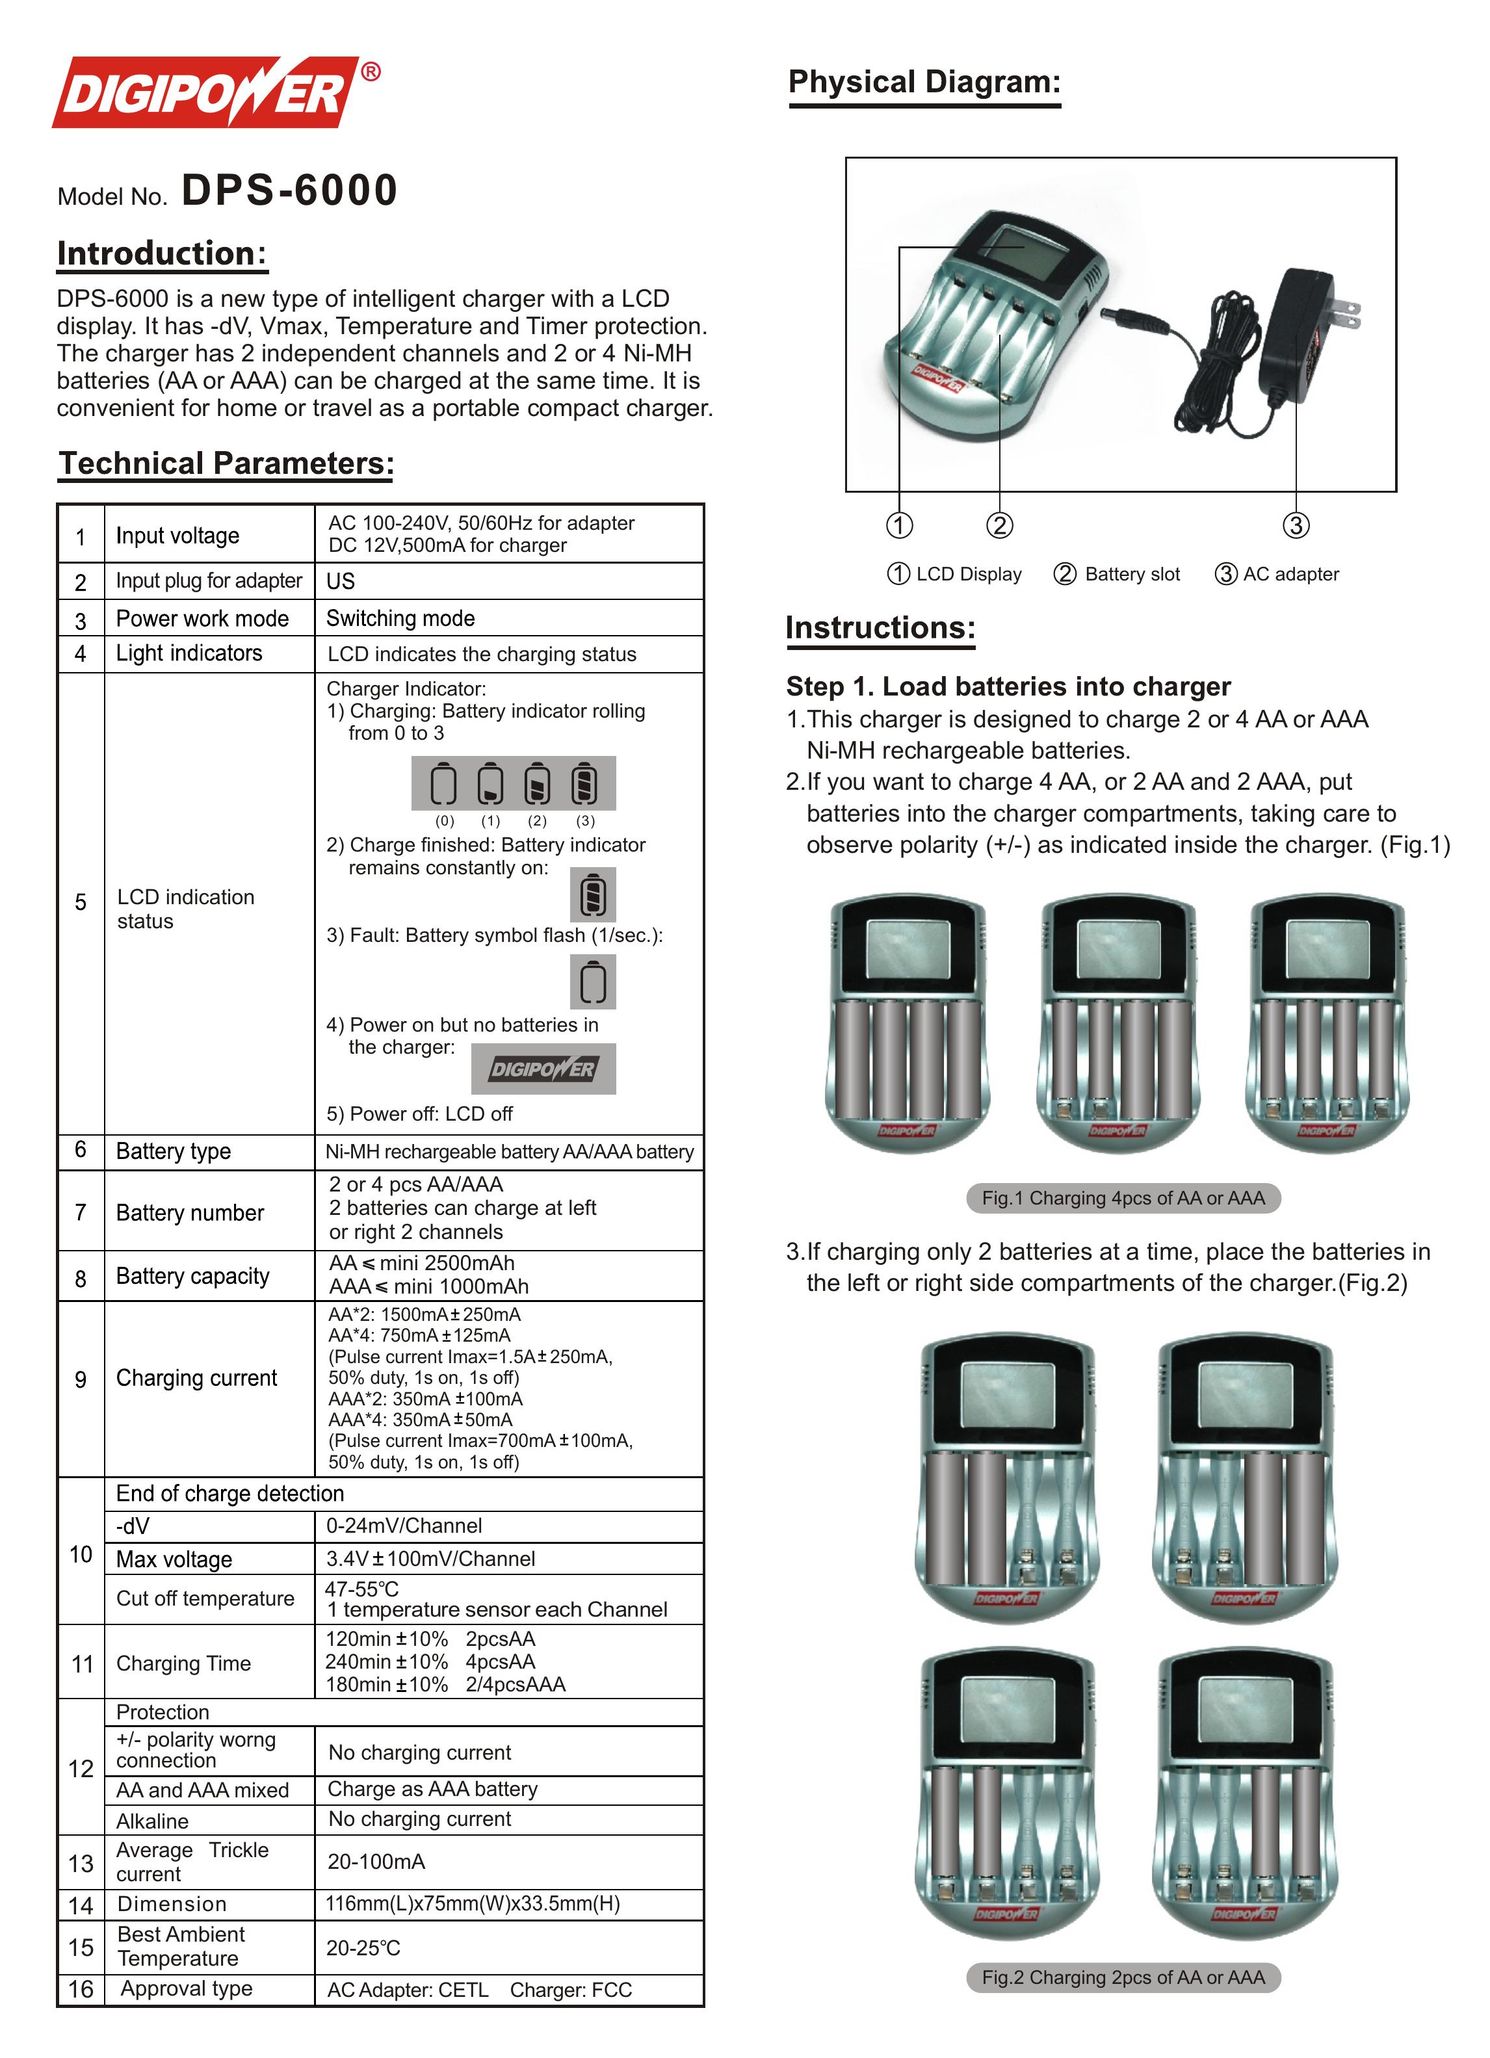 DigiPower DPS-6000 Battery Charger User Manual